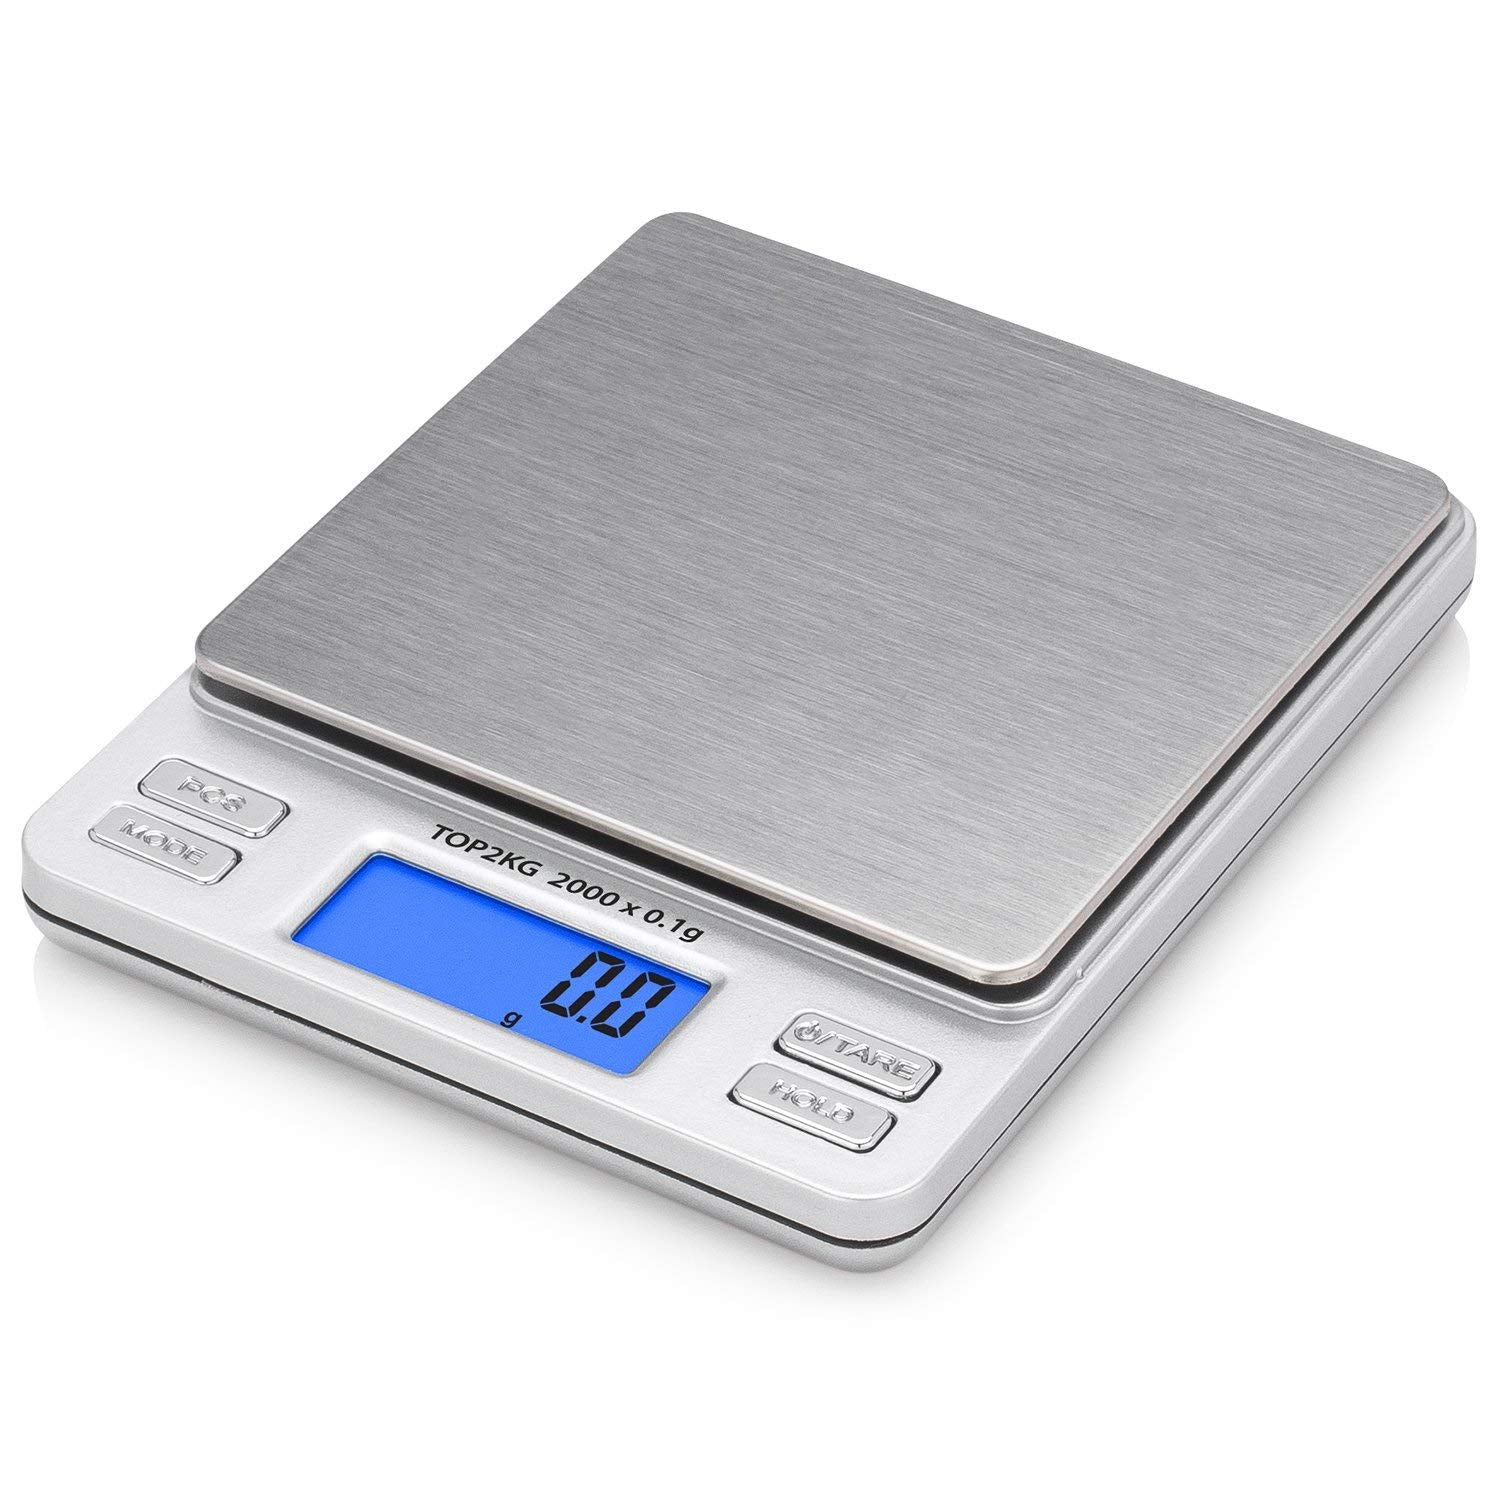 Smart Weigh Digital Pro Pocket Scale 2000g x 0.1gram,Jewelry Scale, Coffee Scale, Food Scale with Tare, Hold and Counting Function,Back-Lit LCD Display  - Like New